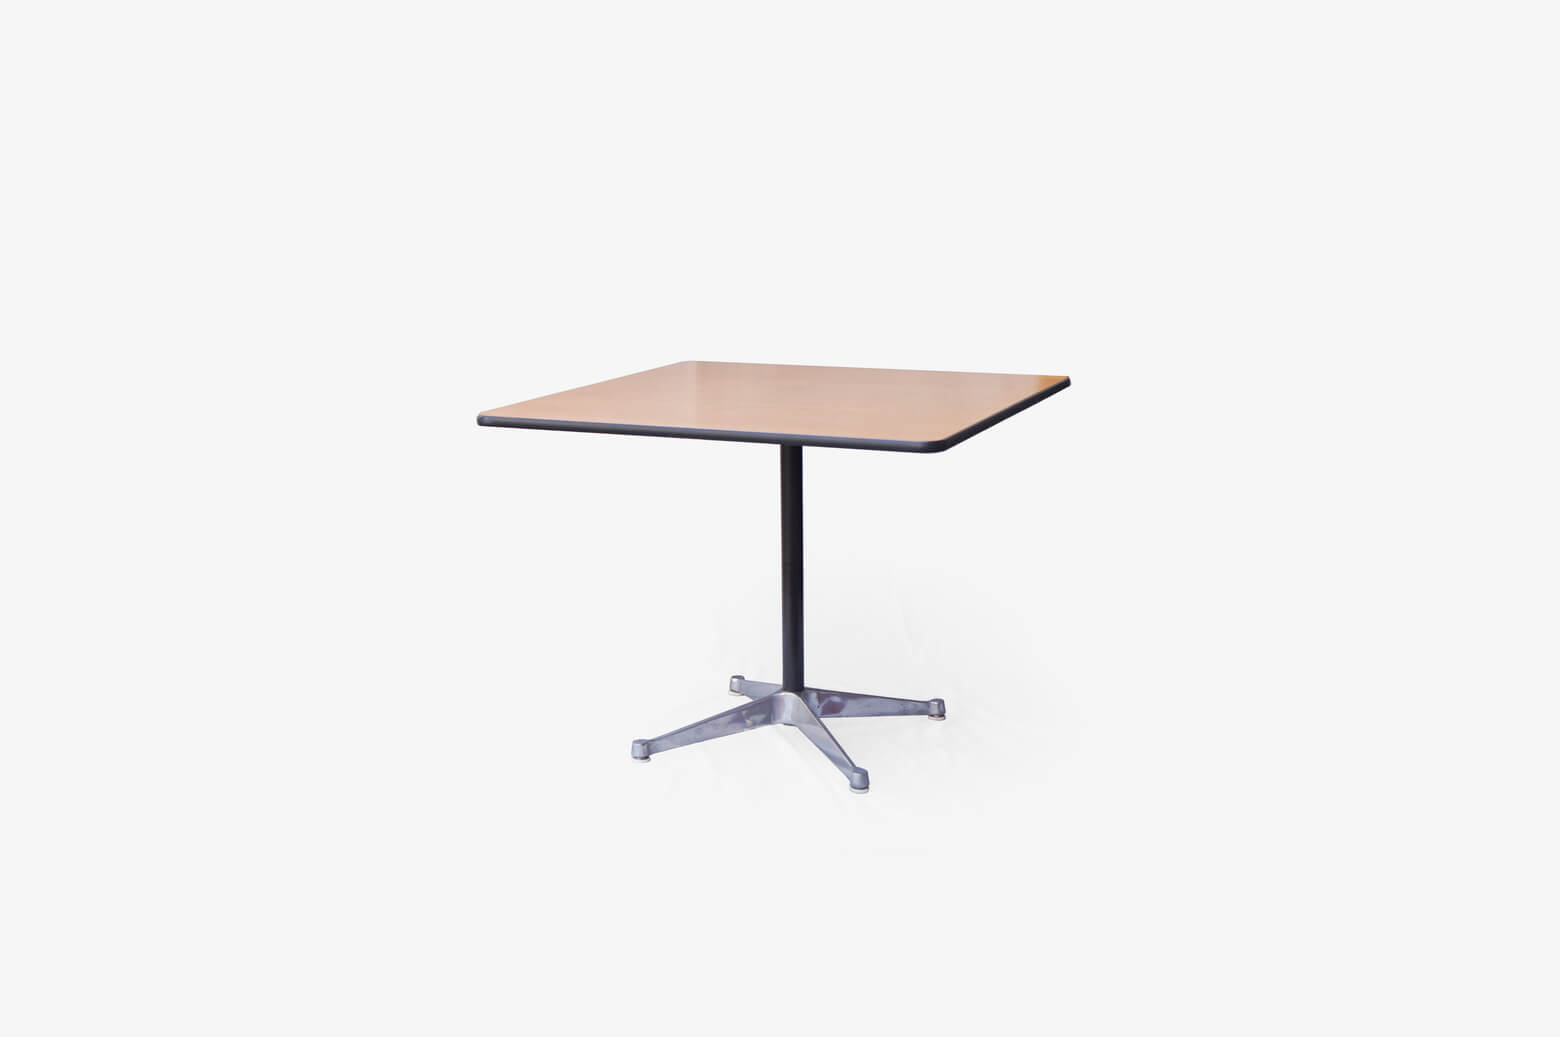 Vintage Herman Miller Contract Base Square Table/ヴィンテージ ハーマンミラー コントラクトベース 正方テーブル